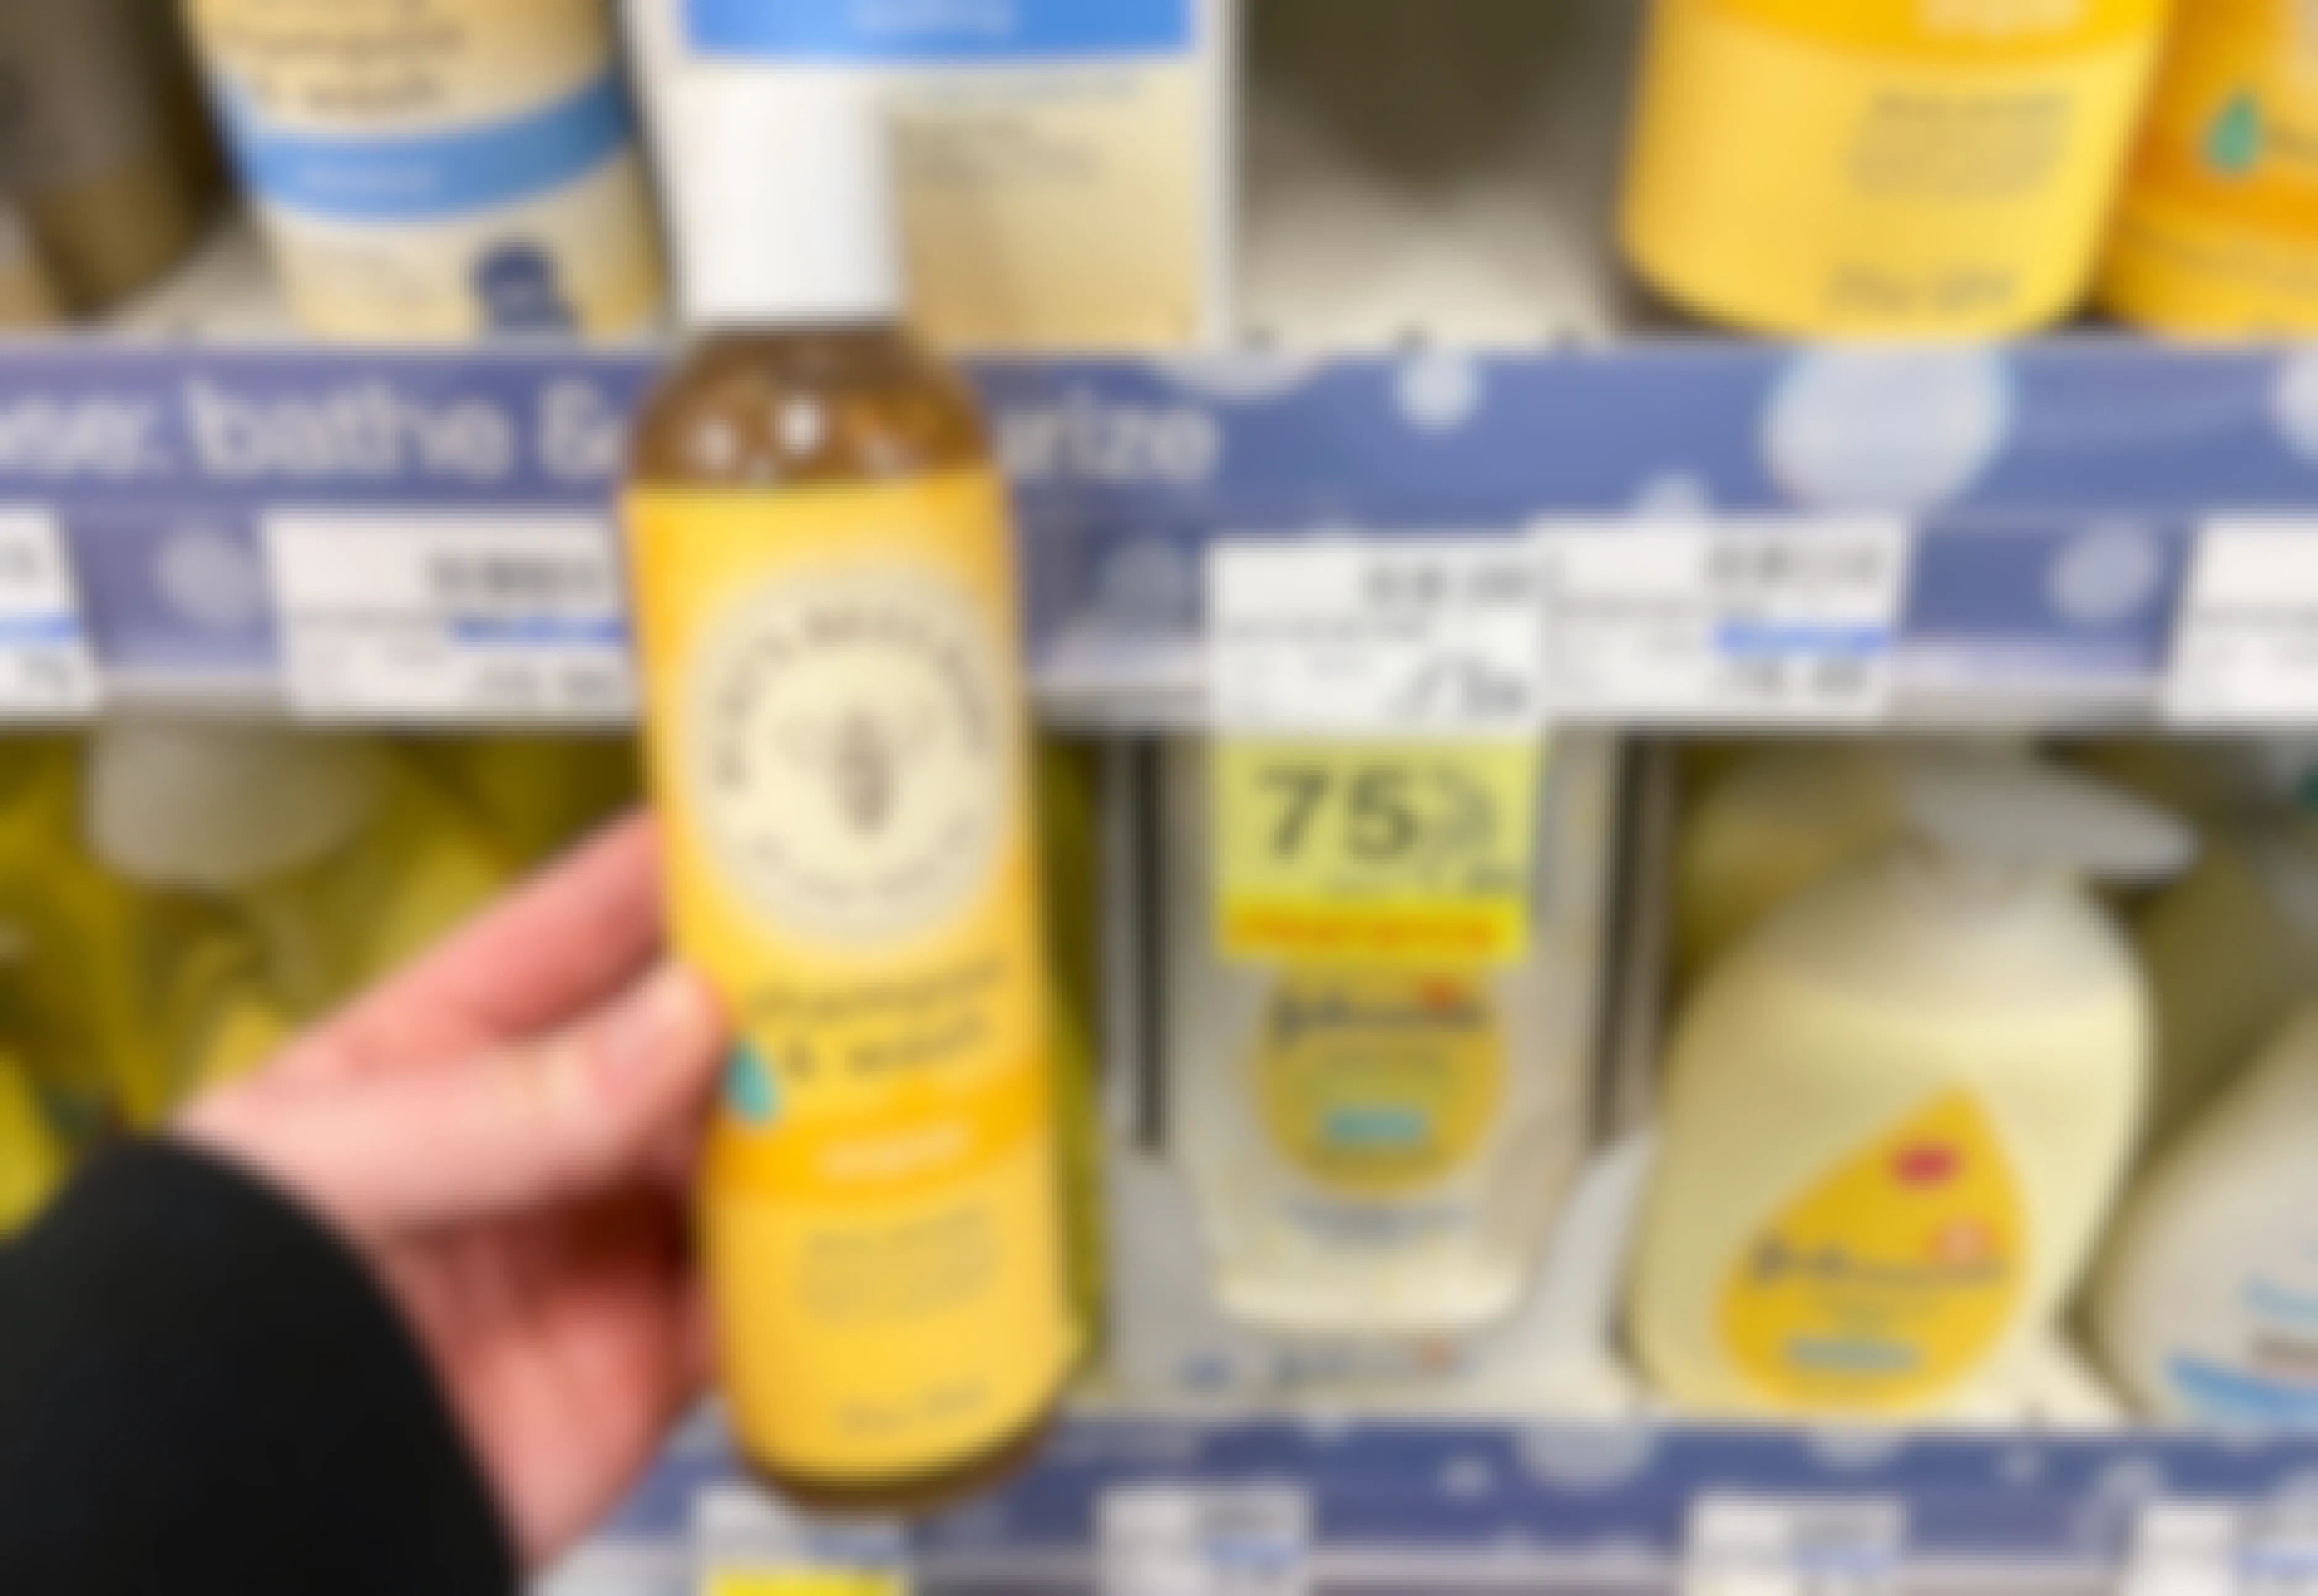 A person's hand holding a bottle of Burt's Bees Baby shampoo & Wash in front of a shelf at CVS.